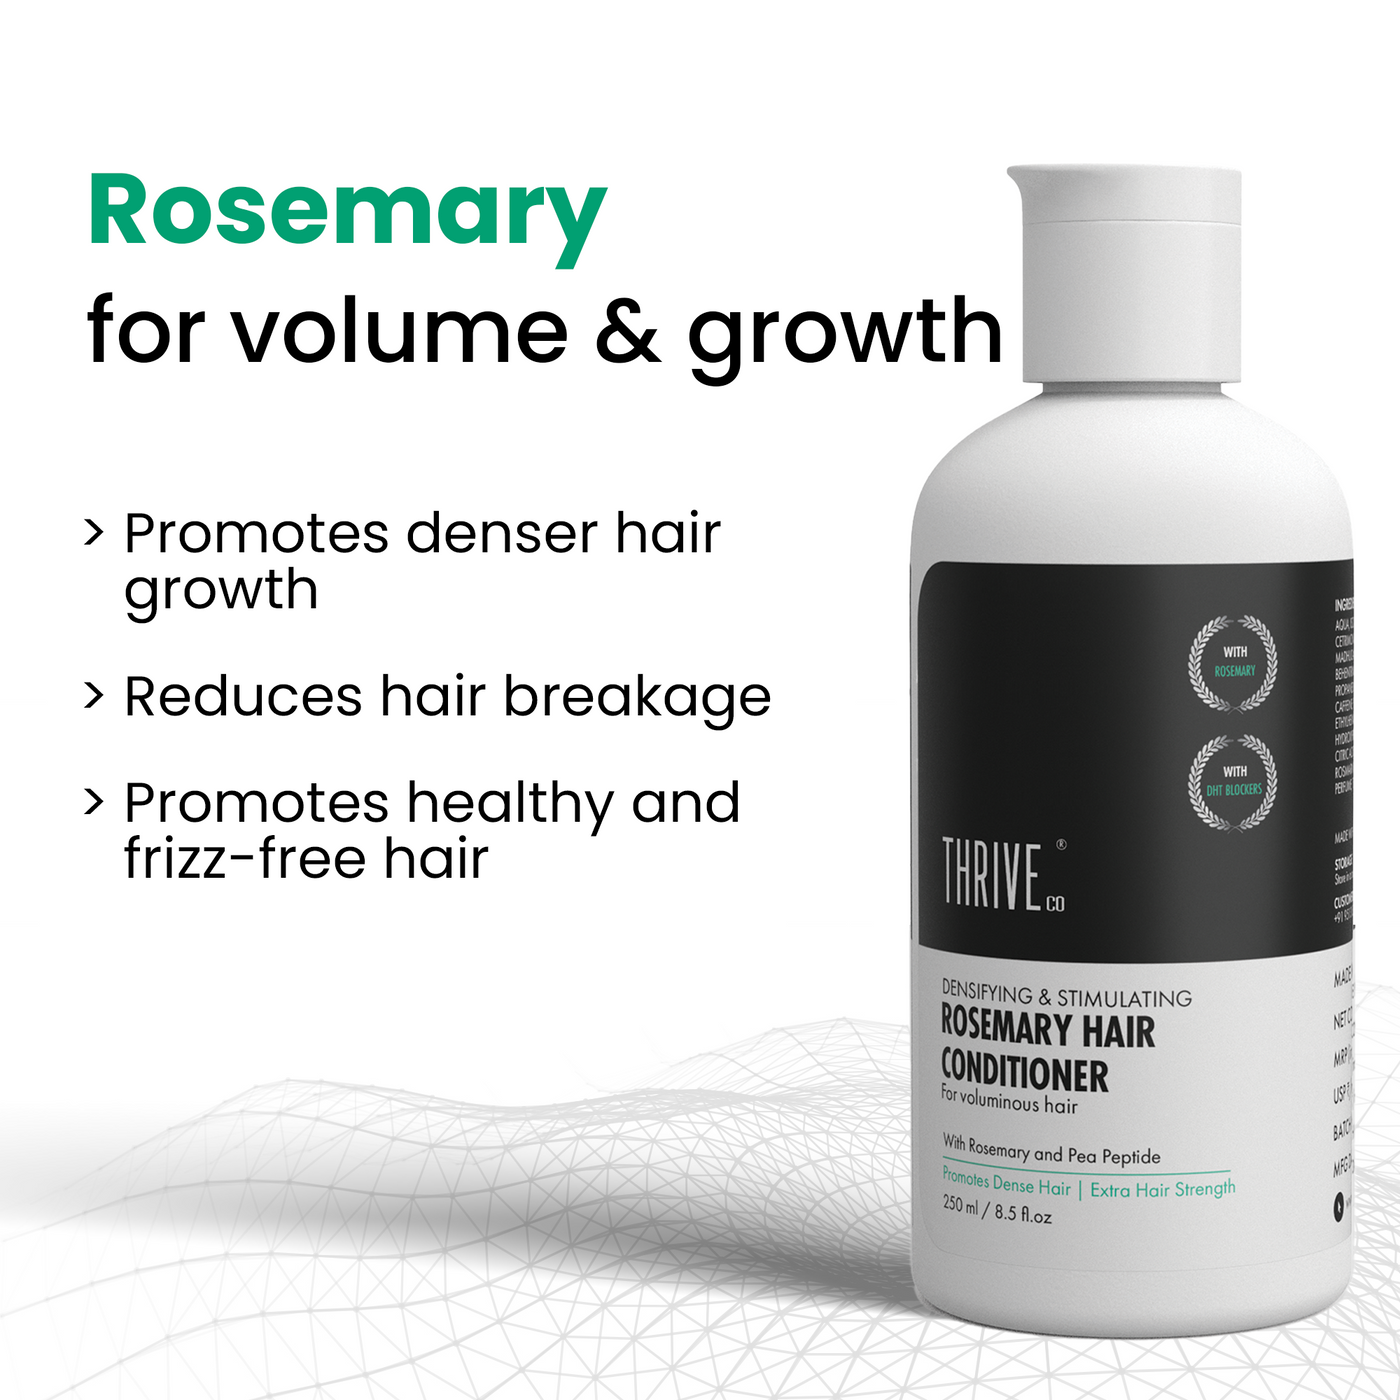 ThriveCo Rosemary Hair Conditioner For Voluminous Hair | Densifying & Stimulating Hair Growth | Promotes Hair Strength | With Pea Peptide & Caffeine | Paraben & Sulfate Free | For Men & Women | 250ml